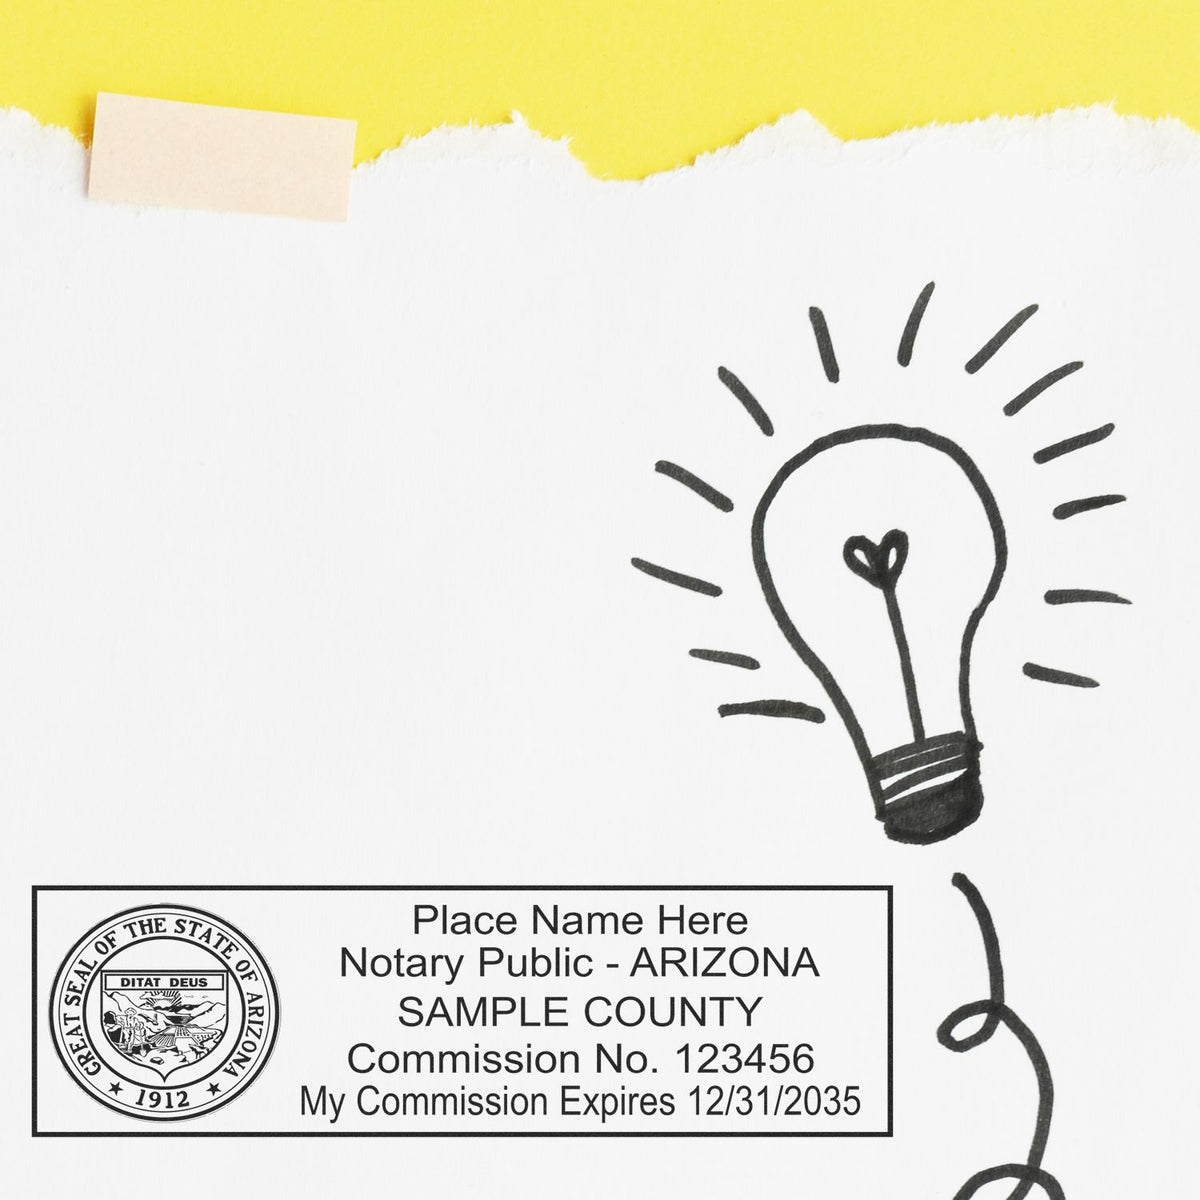 The Super Slim Arizona Notary Public Stamp stamp impression comes to life with a crisp, detailed photo on paper - showcasing true professional quality.